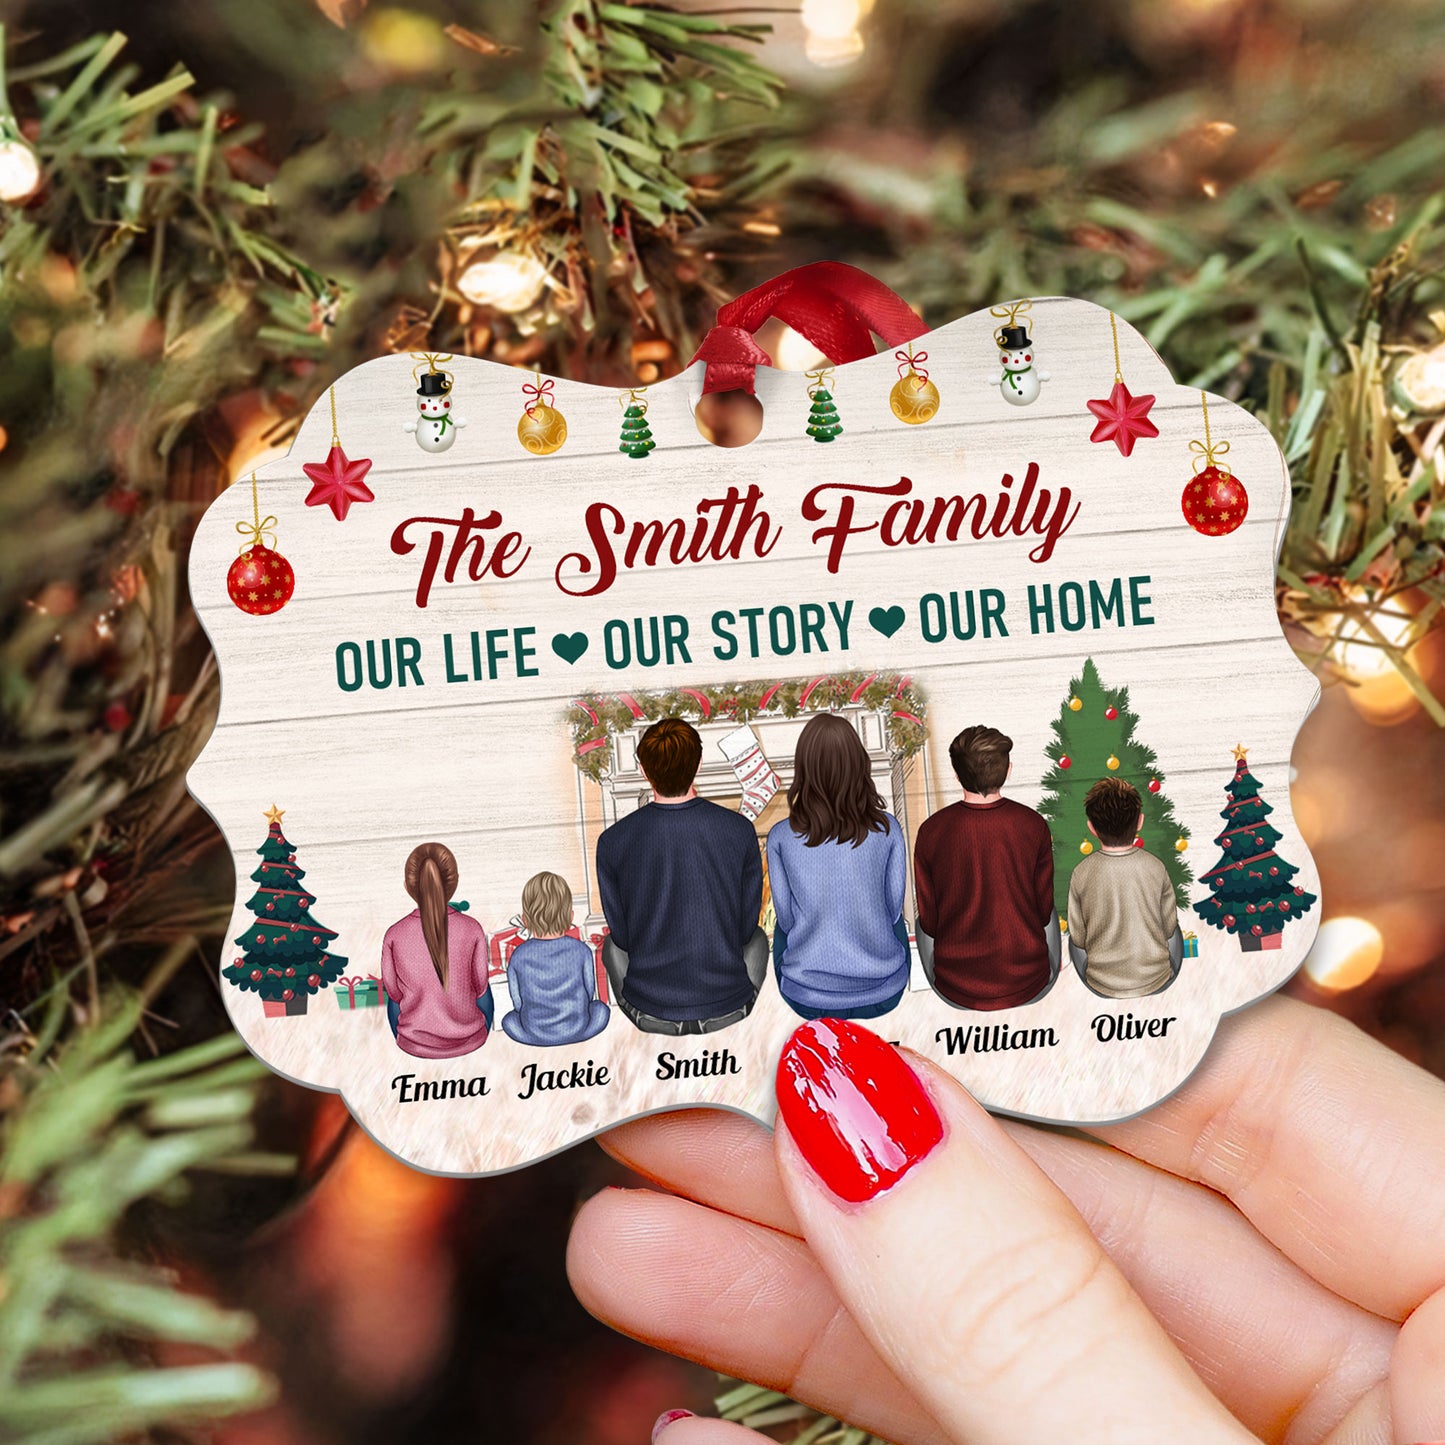 Our Life Our Story Our Home - Personalized Aluminum Ornament - Christmas Decoration Gift For Family